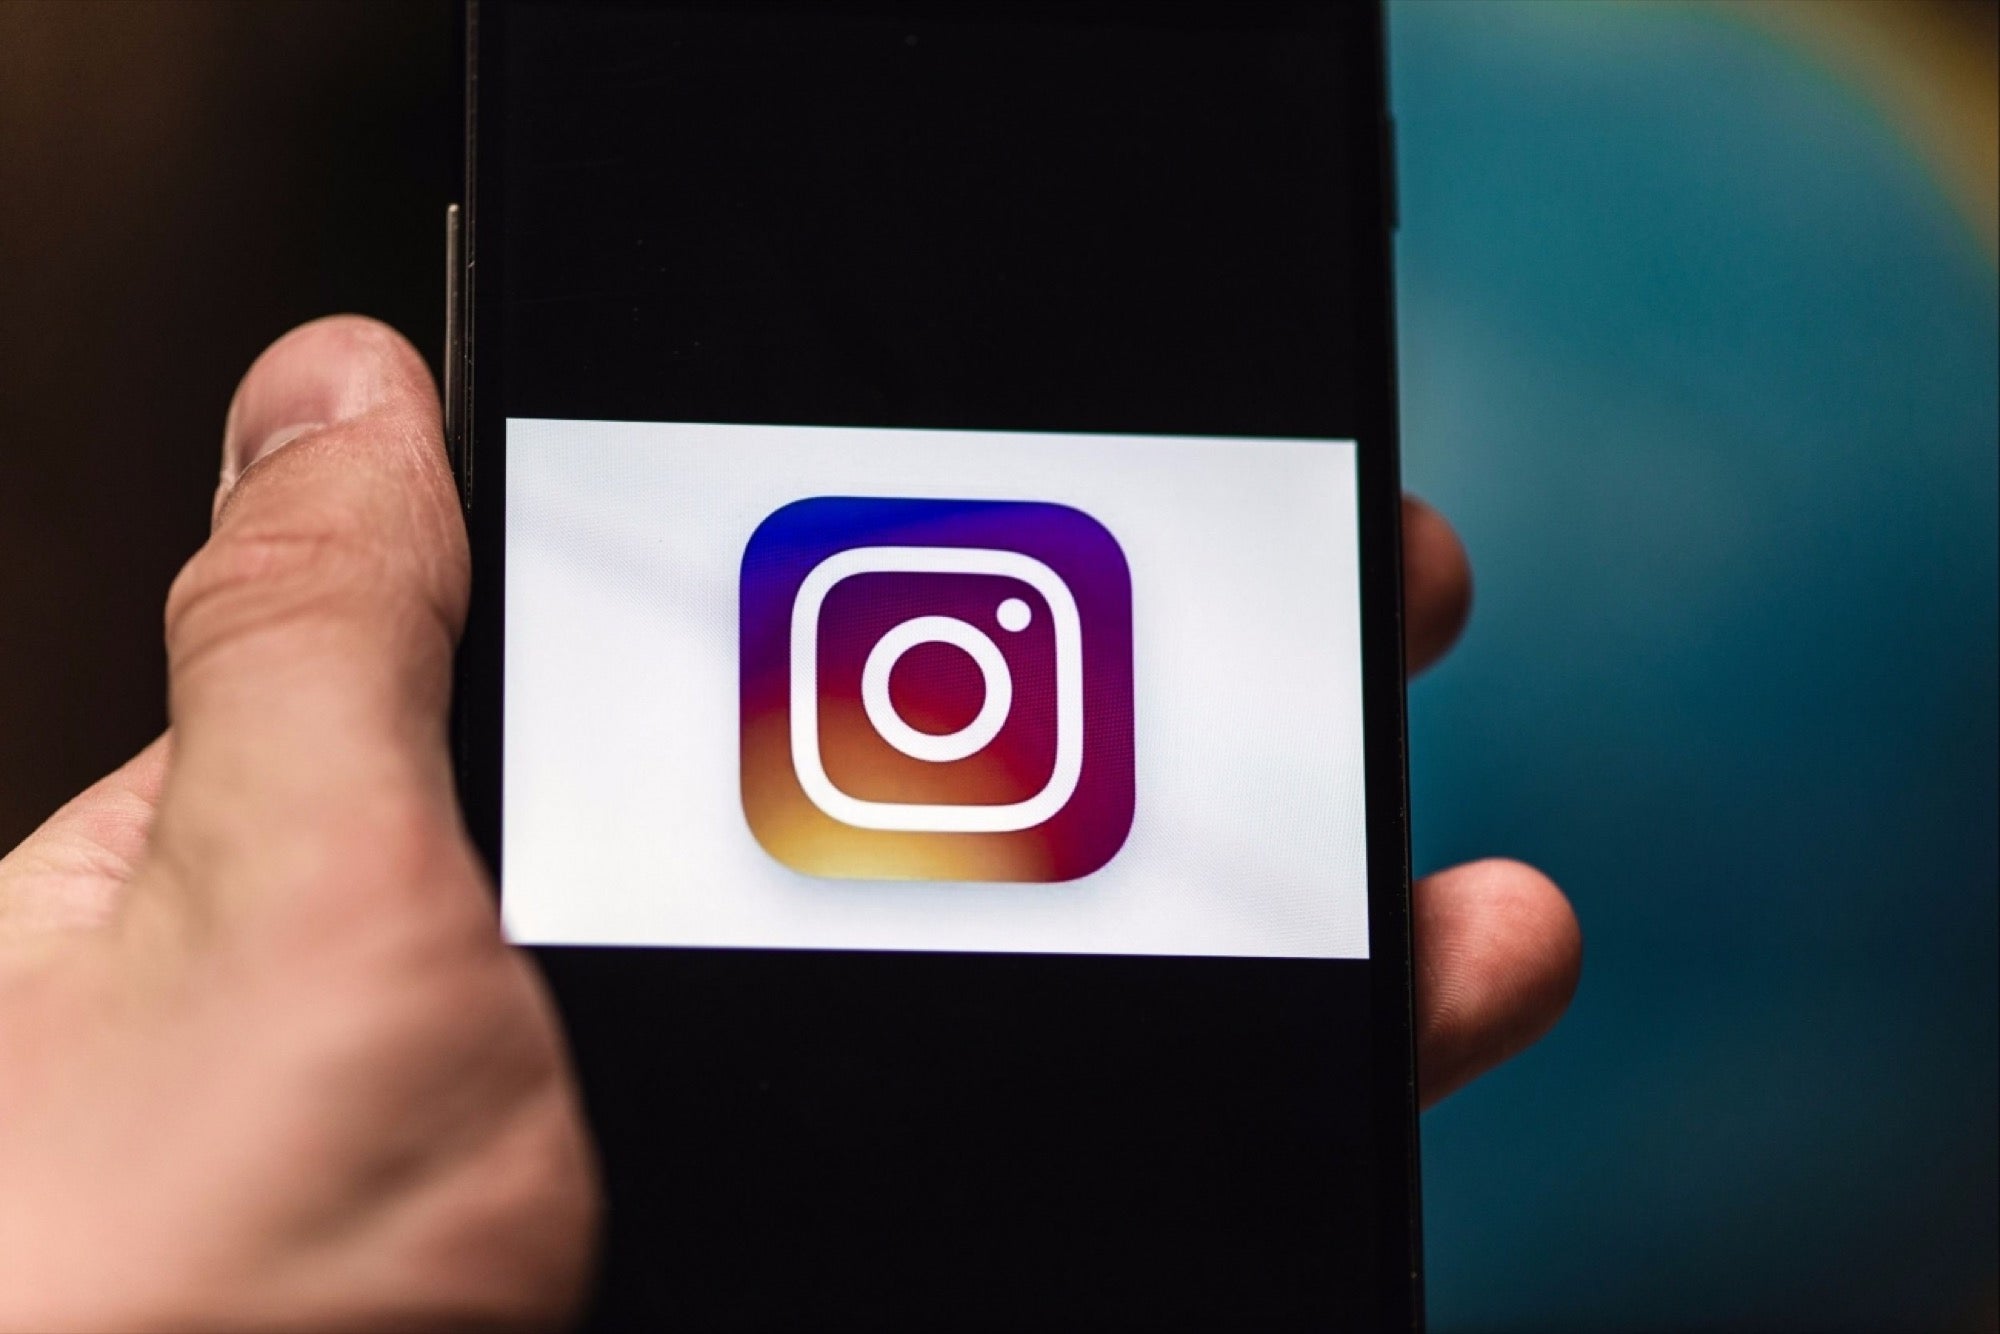 should i have two instagram accounts: personal + business